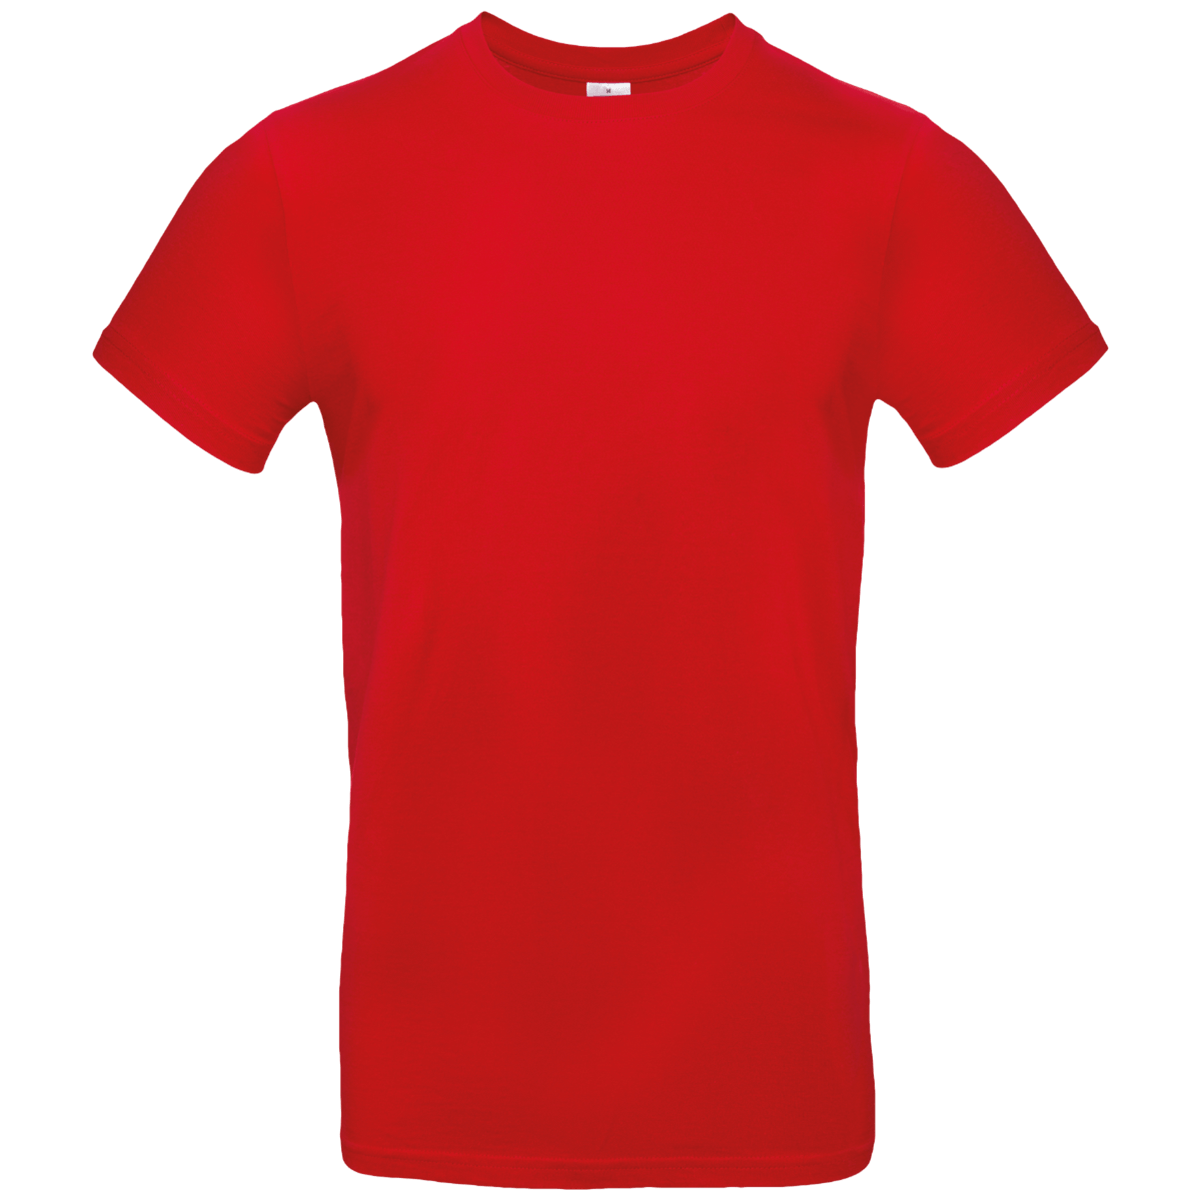 Tee-Shirt Homme Personnalisable Sur Tunetoo Red